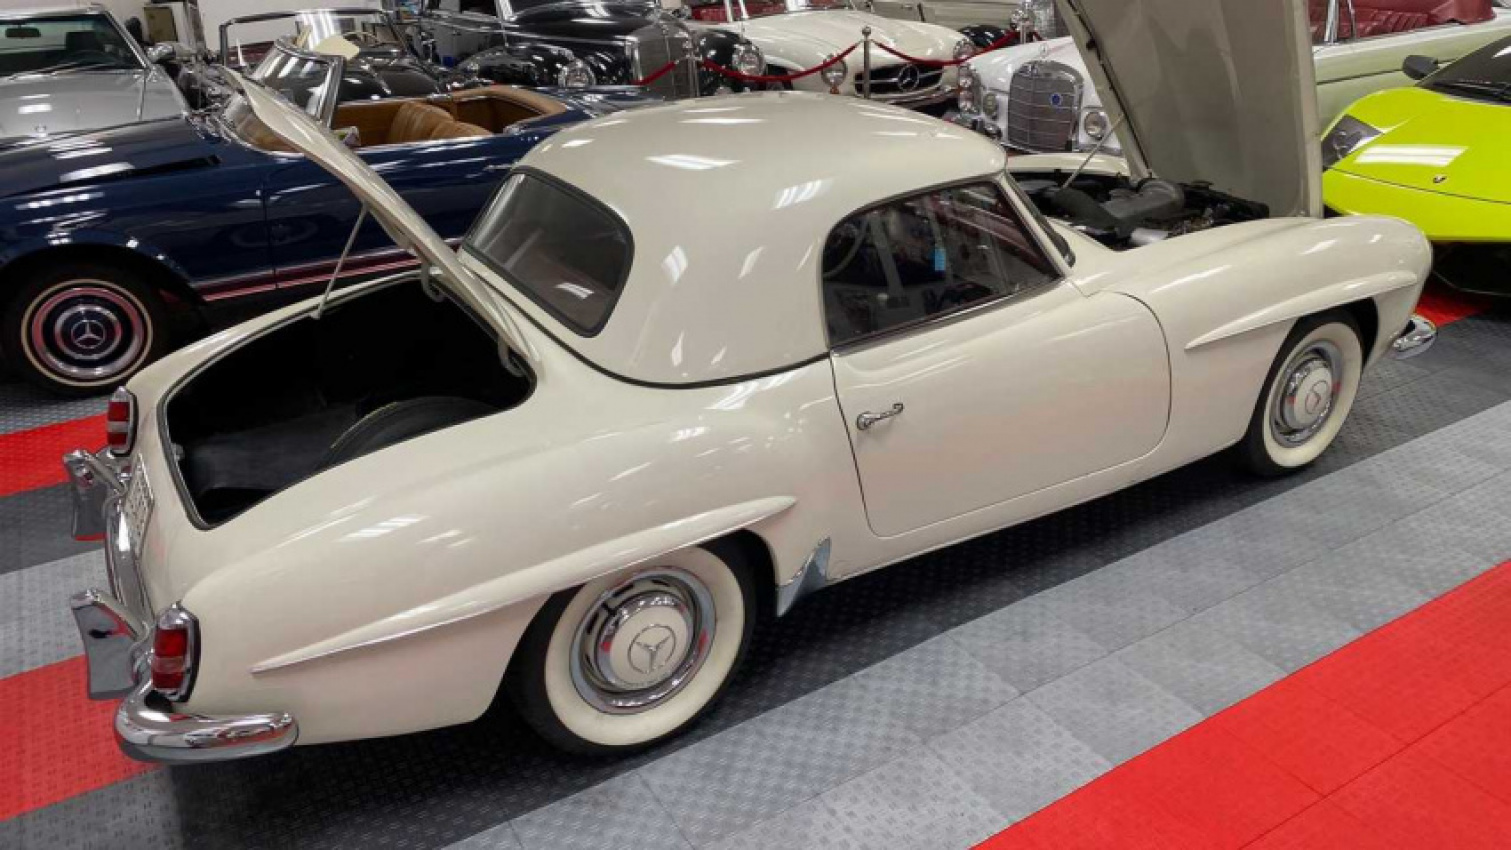 autos, cars, mercedes-benz, mercedes, this 1957 mercedes 190 sl is undergoing a yearlong restoration